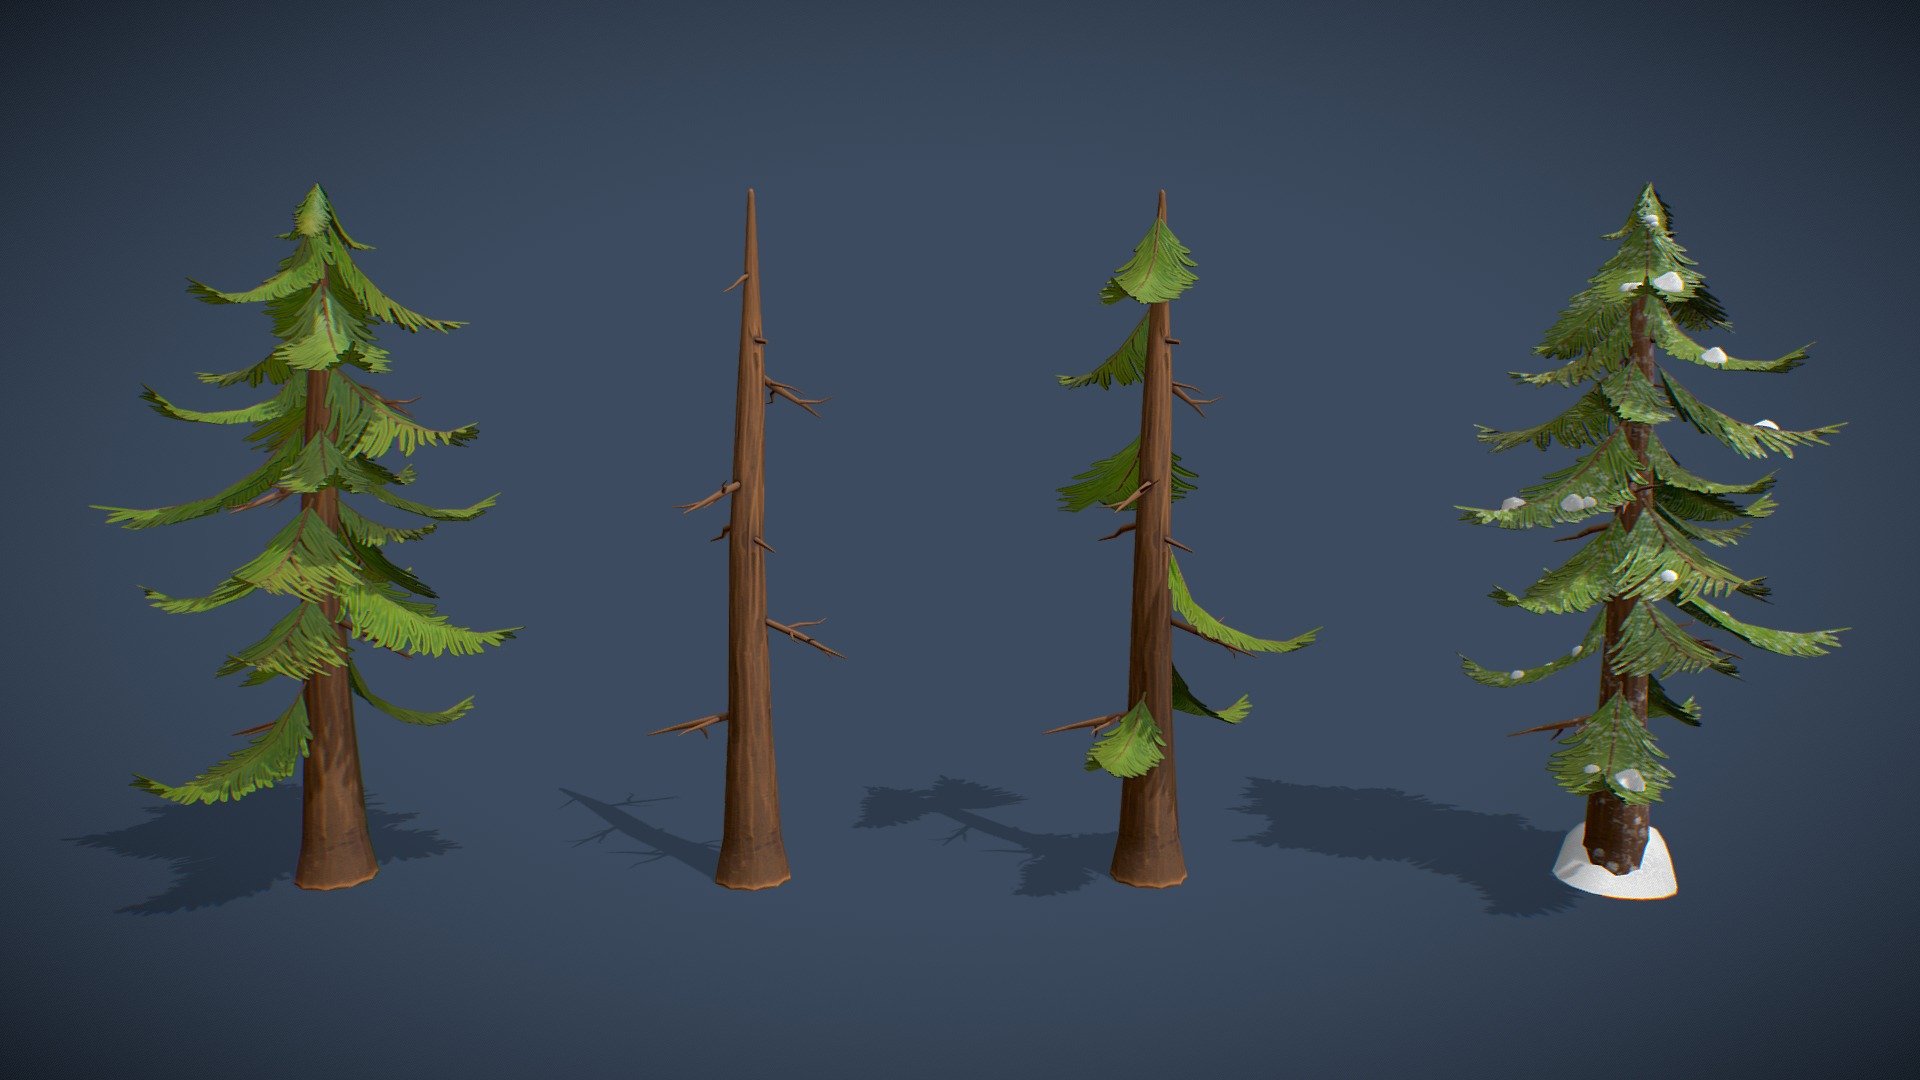 A Package of Stylized Pine Trees with Stylized PBR Textures. Including, Pine Trunk, Snowy Pine Tree, Pine Tree and Pine With Few Leaves. Suitable for any scene. Ready to use in any project.

Are you liked this model? Feel free to take a look on my another models! Here

Features:

.Fbx, .Obj, .Uasset and .Blend files.

Low Poly Mesh game-ready.

Real-World Scale (centimeters).

Unreal Project: 4.20+

Custom Collision for Unreal Engine (Handmade).

Tris Count: 9,226.

LODs.

Pine Tree With Few Leaves
LOD0: 1,803 Tris.
LOD1: 692 Tris.

Pine Trunk
LOD0: 1,575 Tris.
LOD1: 620 Tris.

Pine Tree
LOD0: 2,525 Tris.
LOD1: 979 Tris.

Snowy Pine Tree
LOD0: 3,323 Tris.
LOD1: 1,134 Tris.

Number of Textures:10

Number of Textures (UE4/UE5): 6

PBR Textures (2048x2048) (PNG).

Type of Textures: Base Color, Roughness, Metallic, Normal Map and Ambient Occlusion (PNG).

Combined RMA texture (Roughness, Metallic and Ambient Occlusion) for Unreal Engine (PNG) 3d model